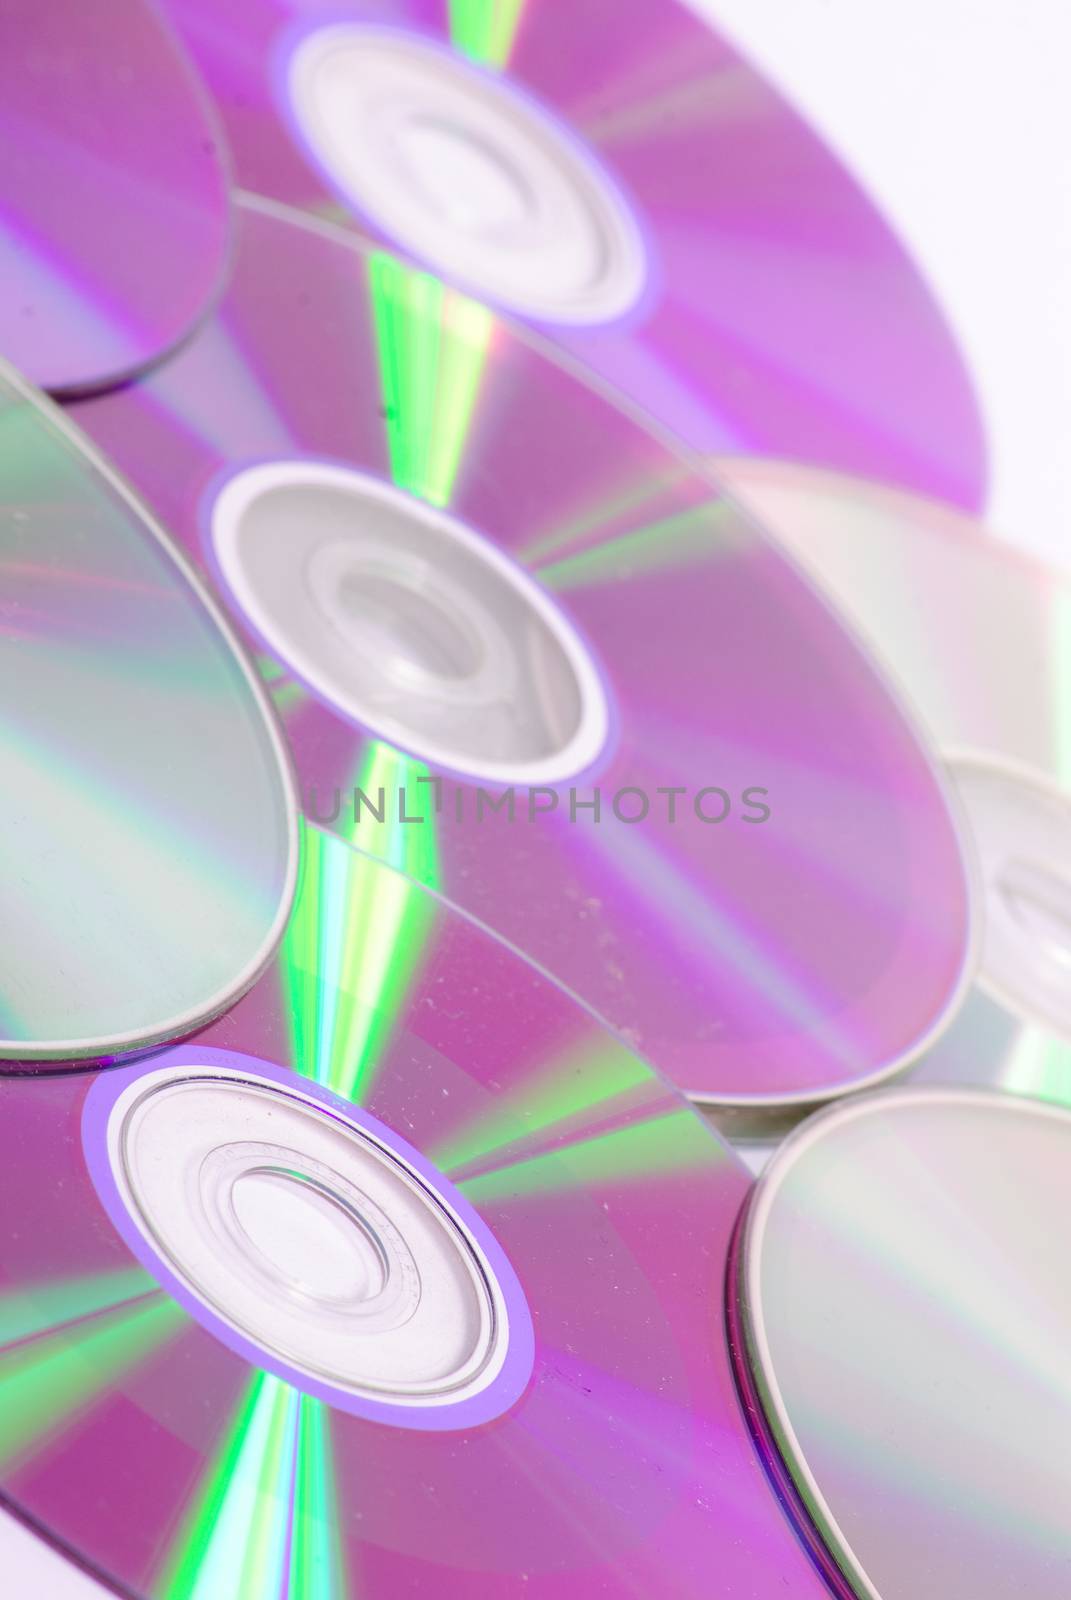 pile of old cds